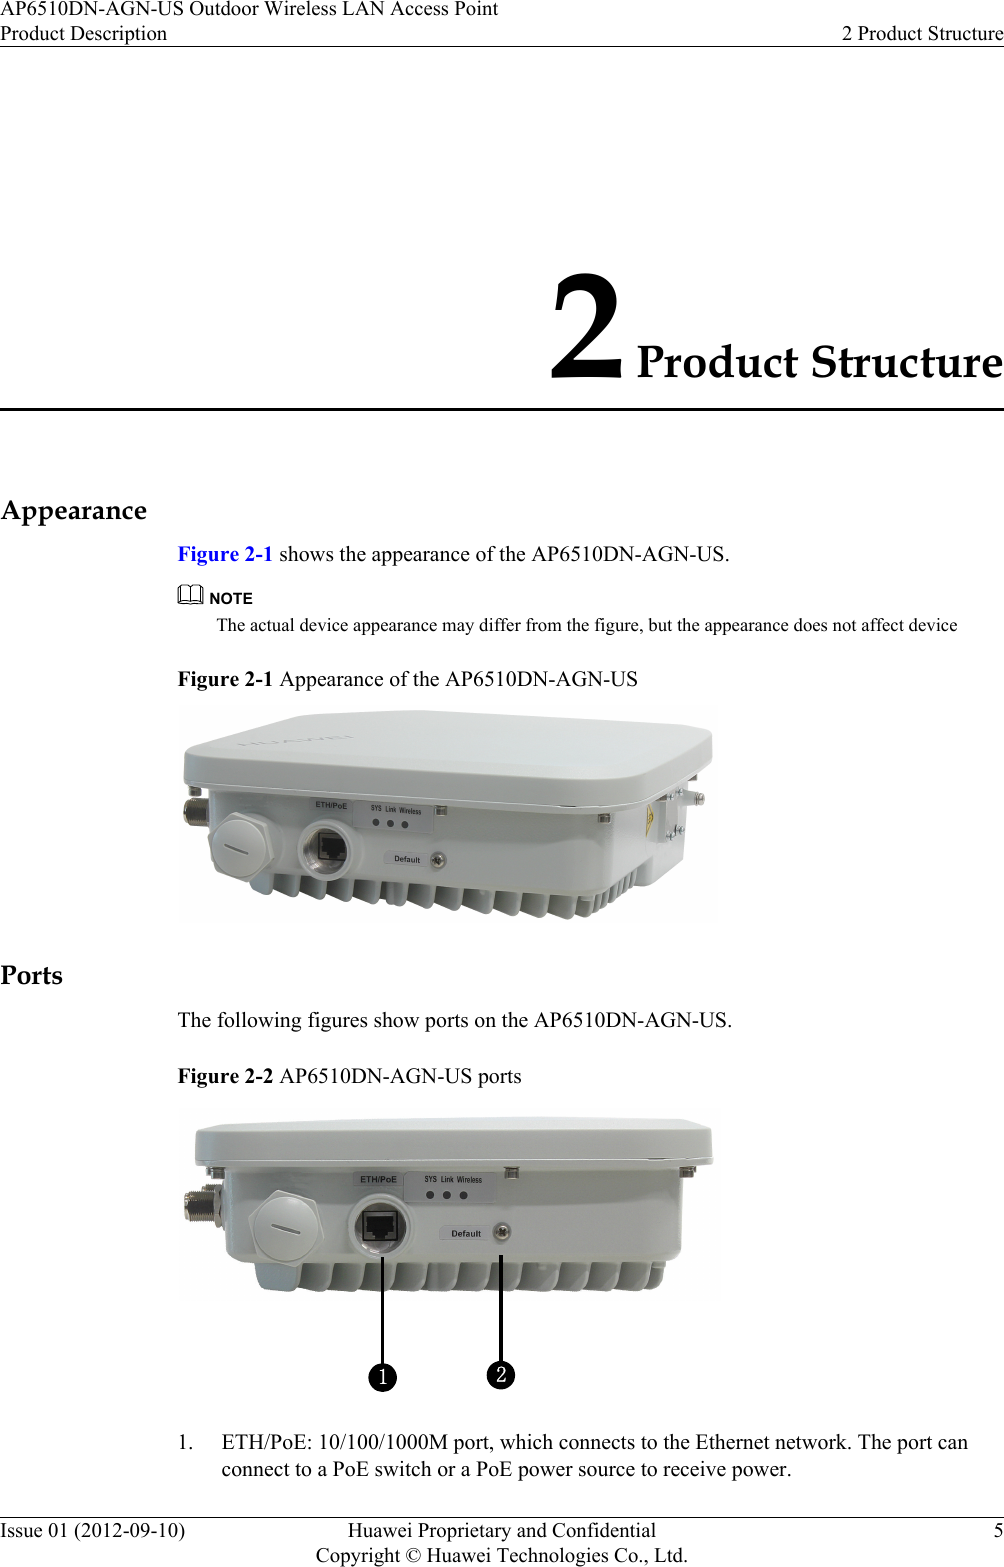 2 Product StructureAppearanceFigure 2-1 shows the appearance of the AP6510DN-AGN-US.NOTEThe actual device appearance may differ from the figure, but the appearance does not affect deviceFigure 2-1 Appearance of the AP6510DN-AGN-USPortsThe following figures show ports on the AP6510DN-AGN-US.Figure 2-2 AP6510DN-AGN-US ports121. ETH/PoE: 10/100/1000M port, which connects to the Ethernet network. The port canconnect to a PoE switch or a PoE power source to receive power.AP6510DN-AGN-US Outdoor Wireless LAN Access PointProduct Description 2 Product StructureIssue 01 (2012-09-10) Huawei Proprietary and ConfidentialCopyright © Huawei Technologies Co., Ltd.5